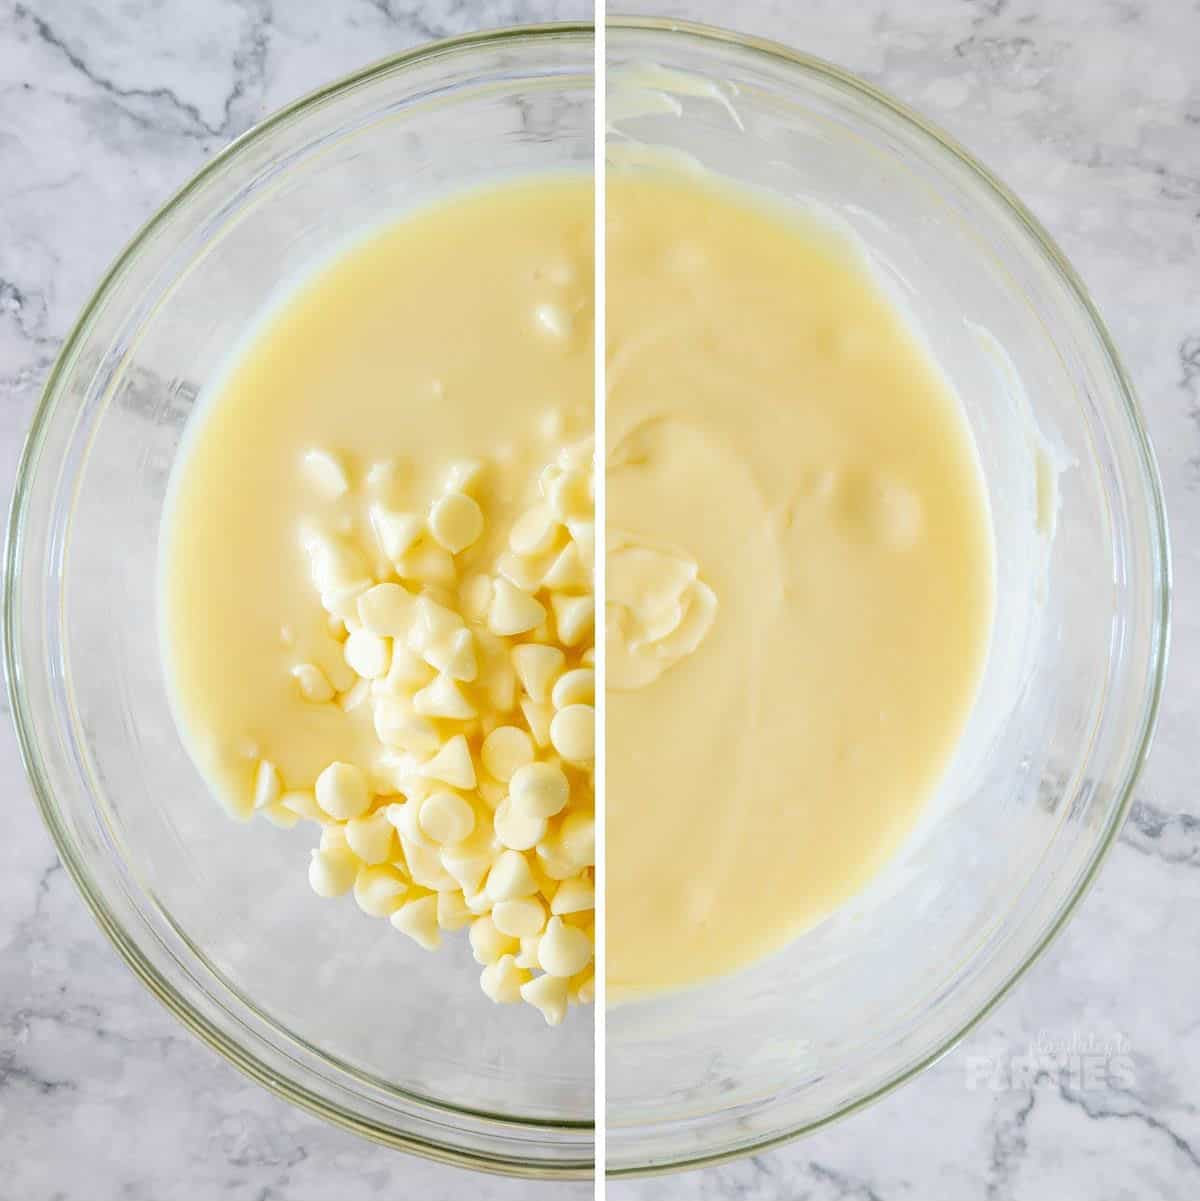 White chocolate and condensed milk melted together.